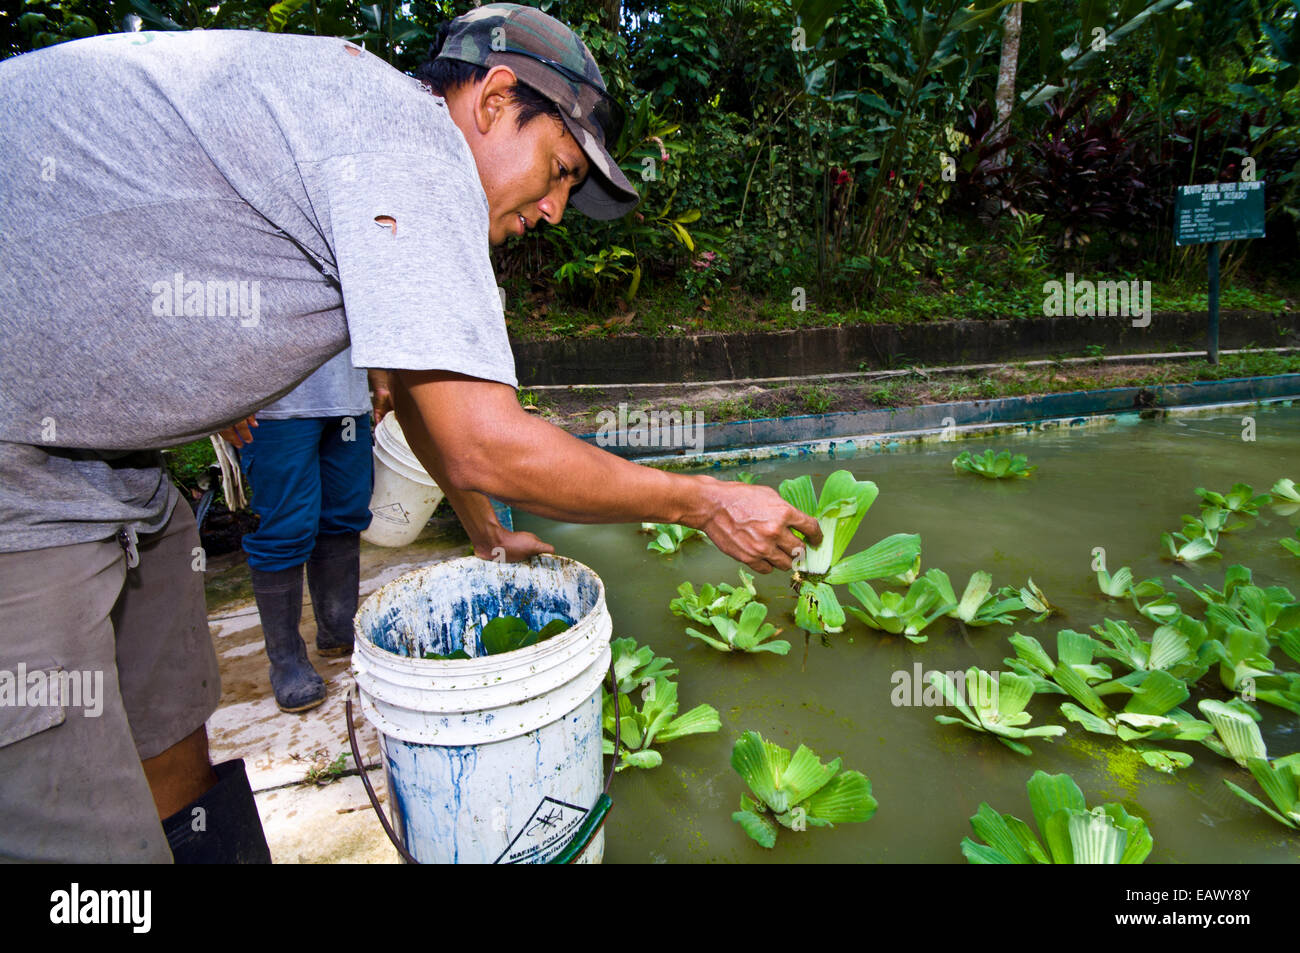 A park ranger places water lettuce plants into an Amazon River Dolphin pool to clean the water. Stock Photo